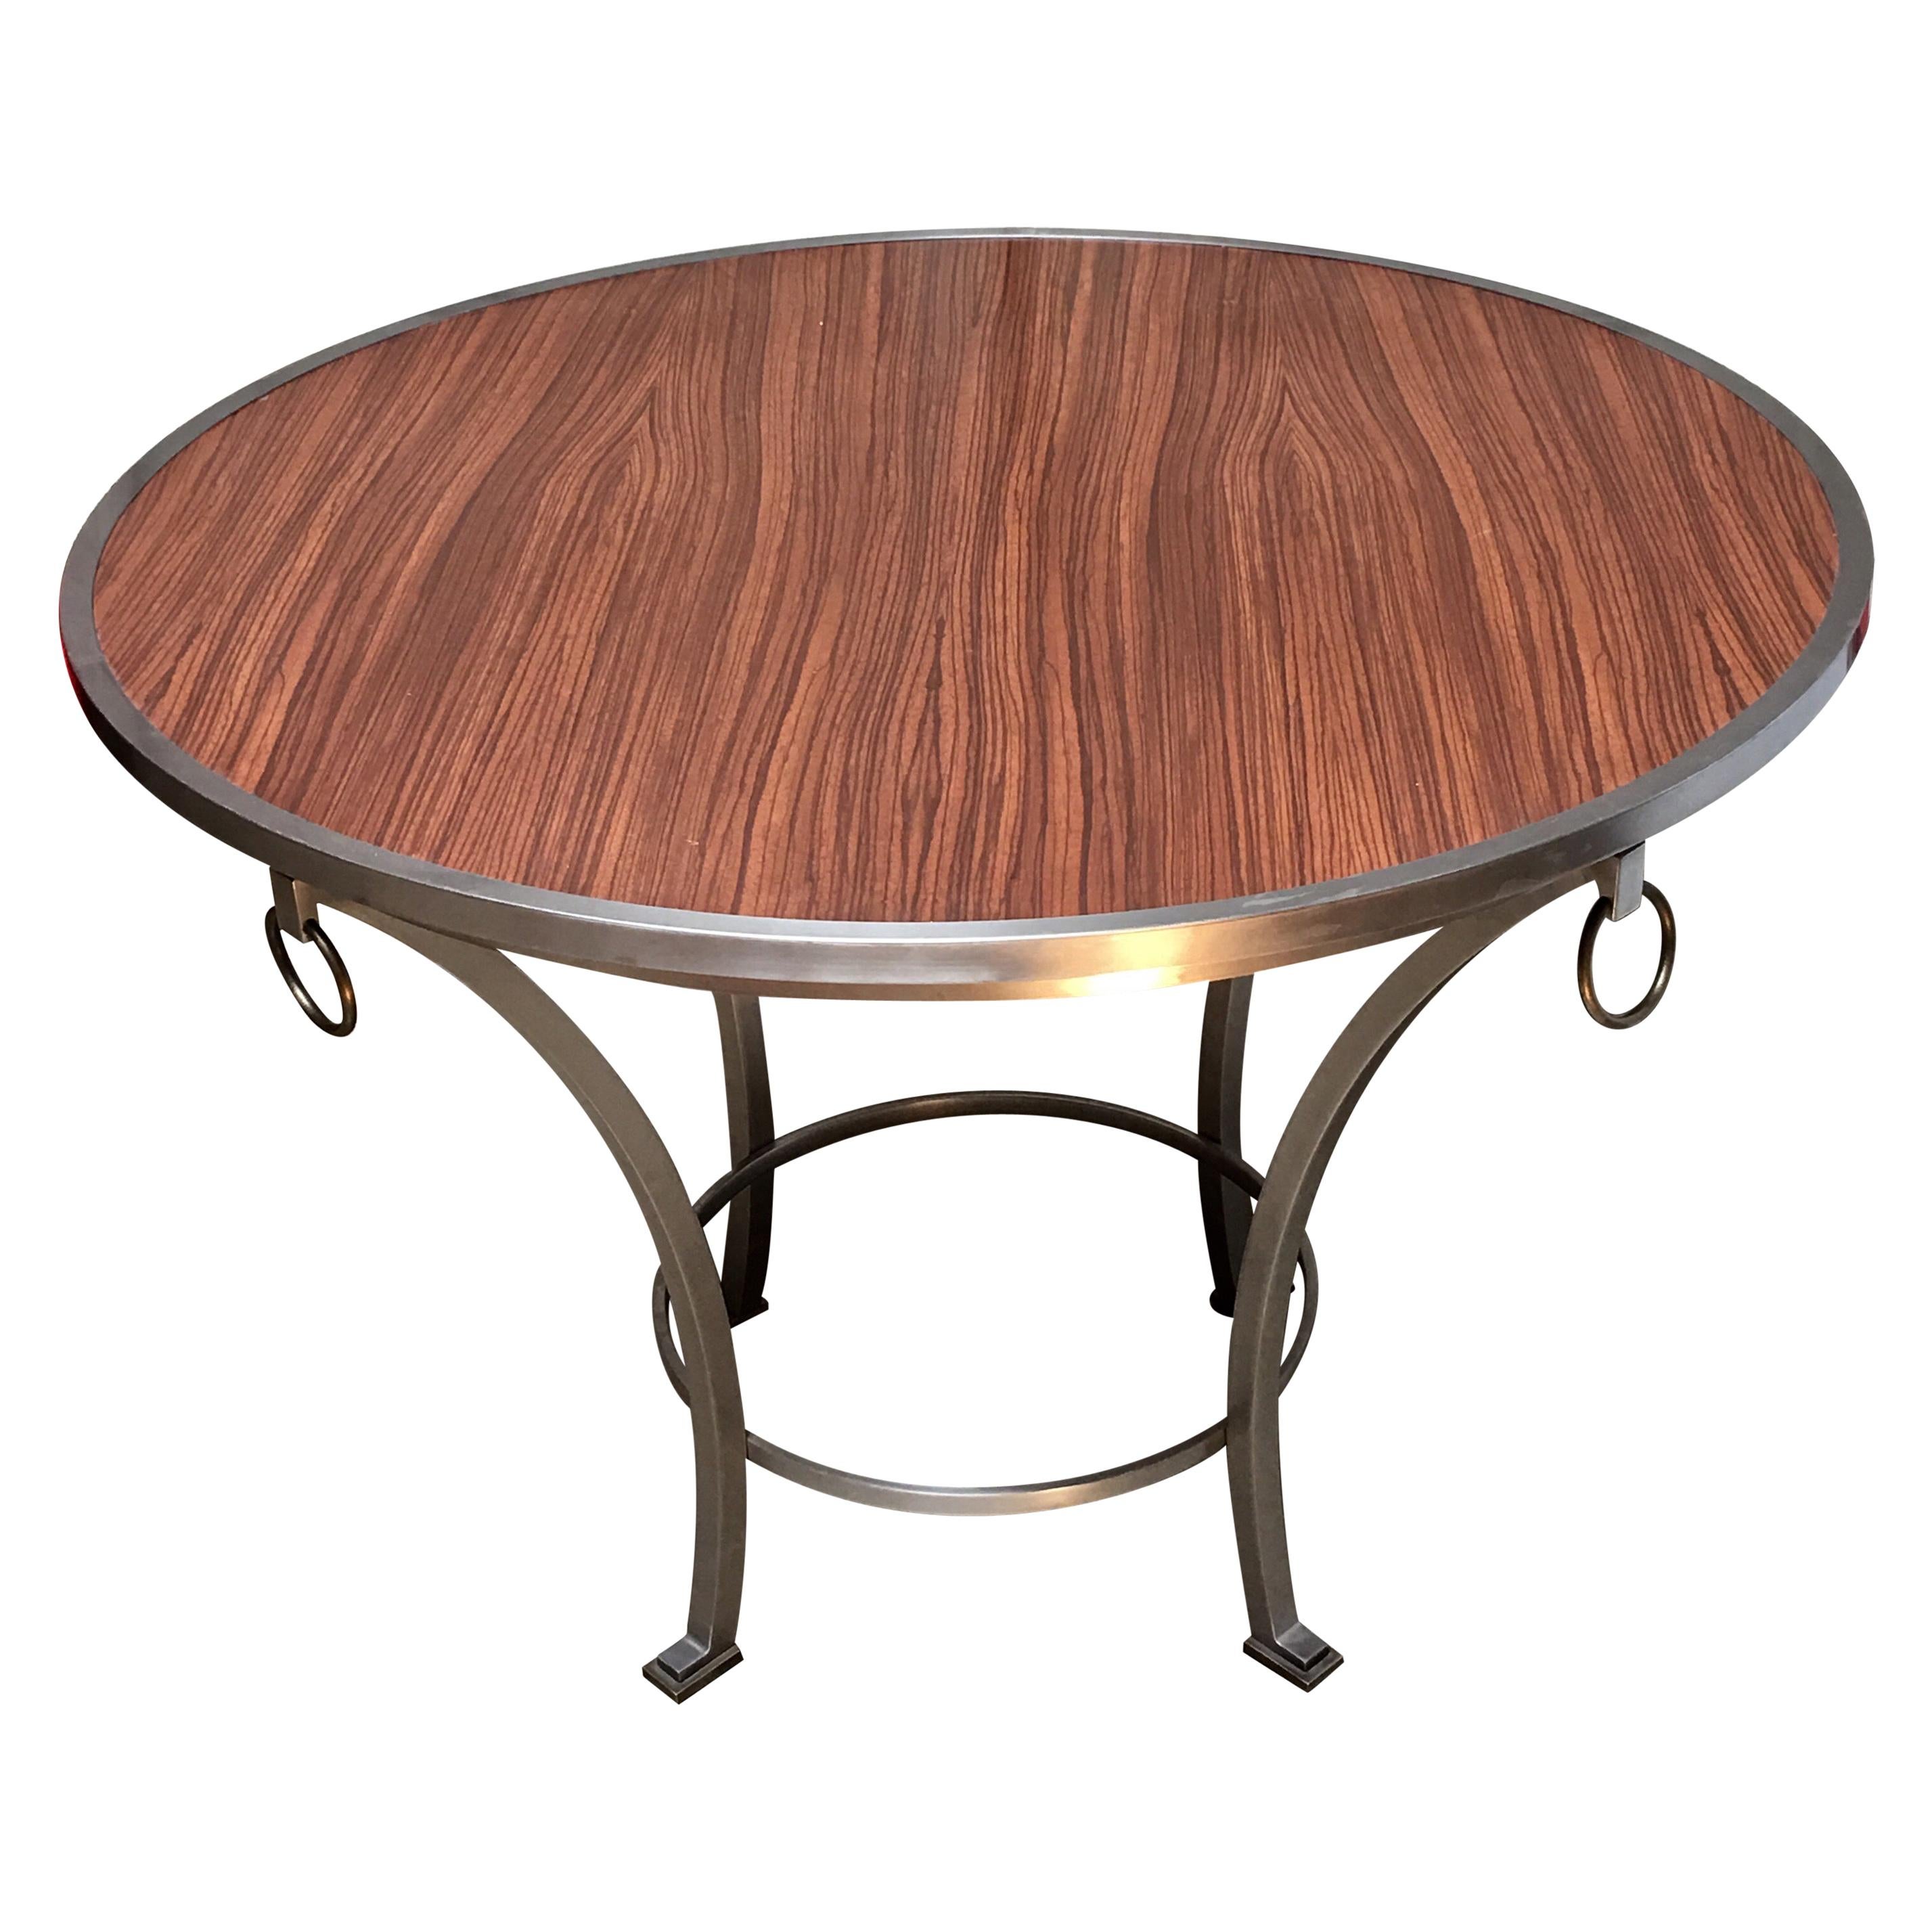 Contemporary Zebra Wood Dining / Game / Center Table with Steel Frame 